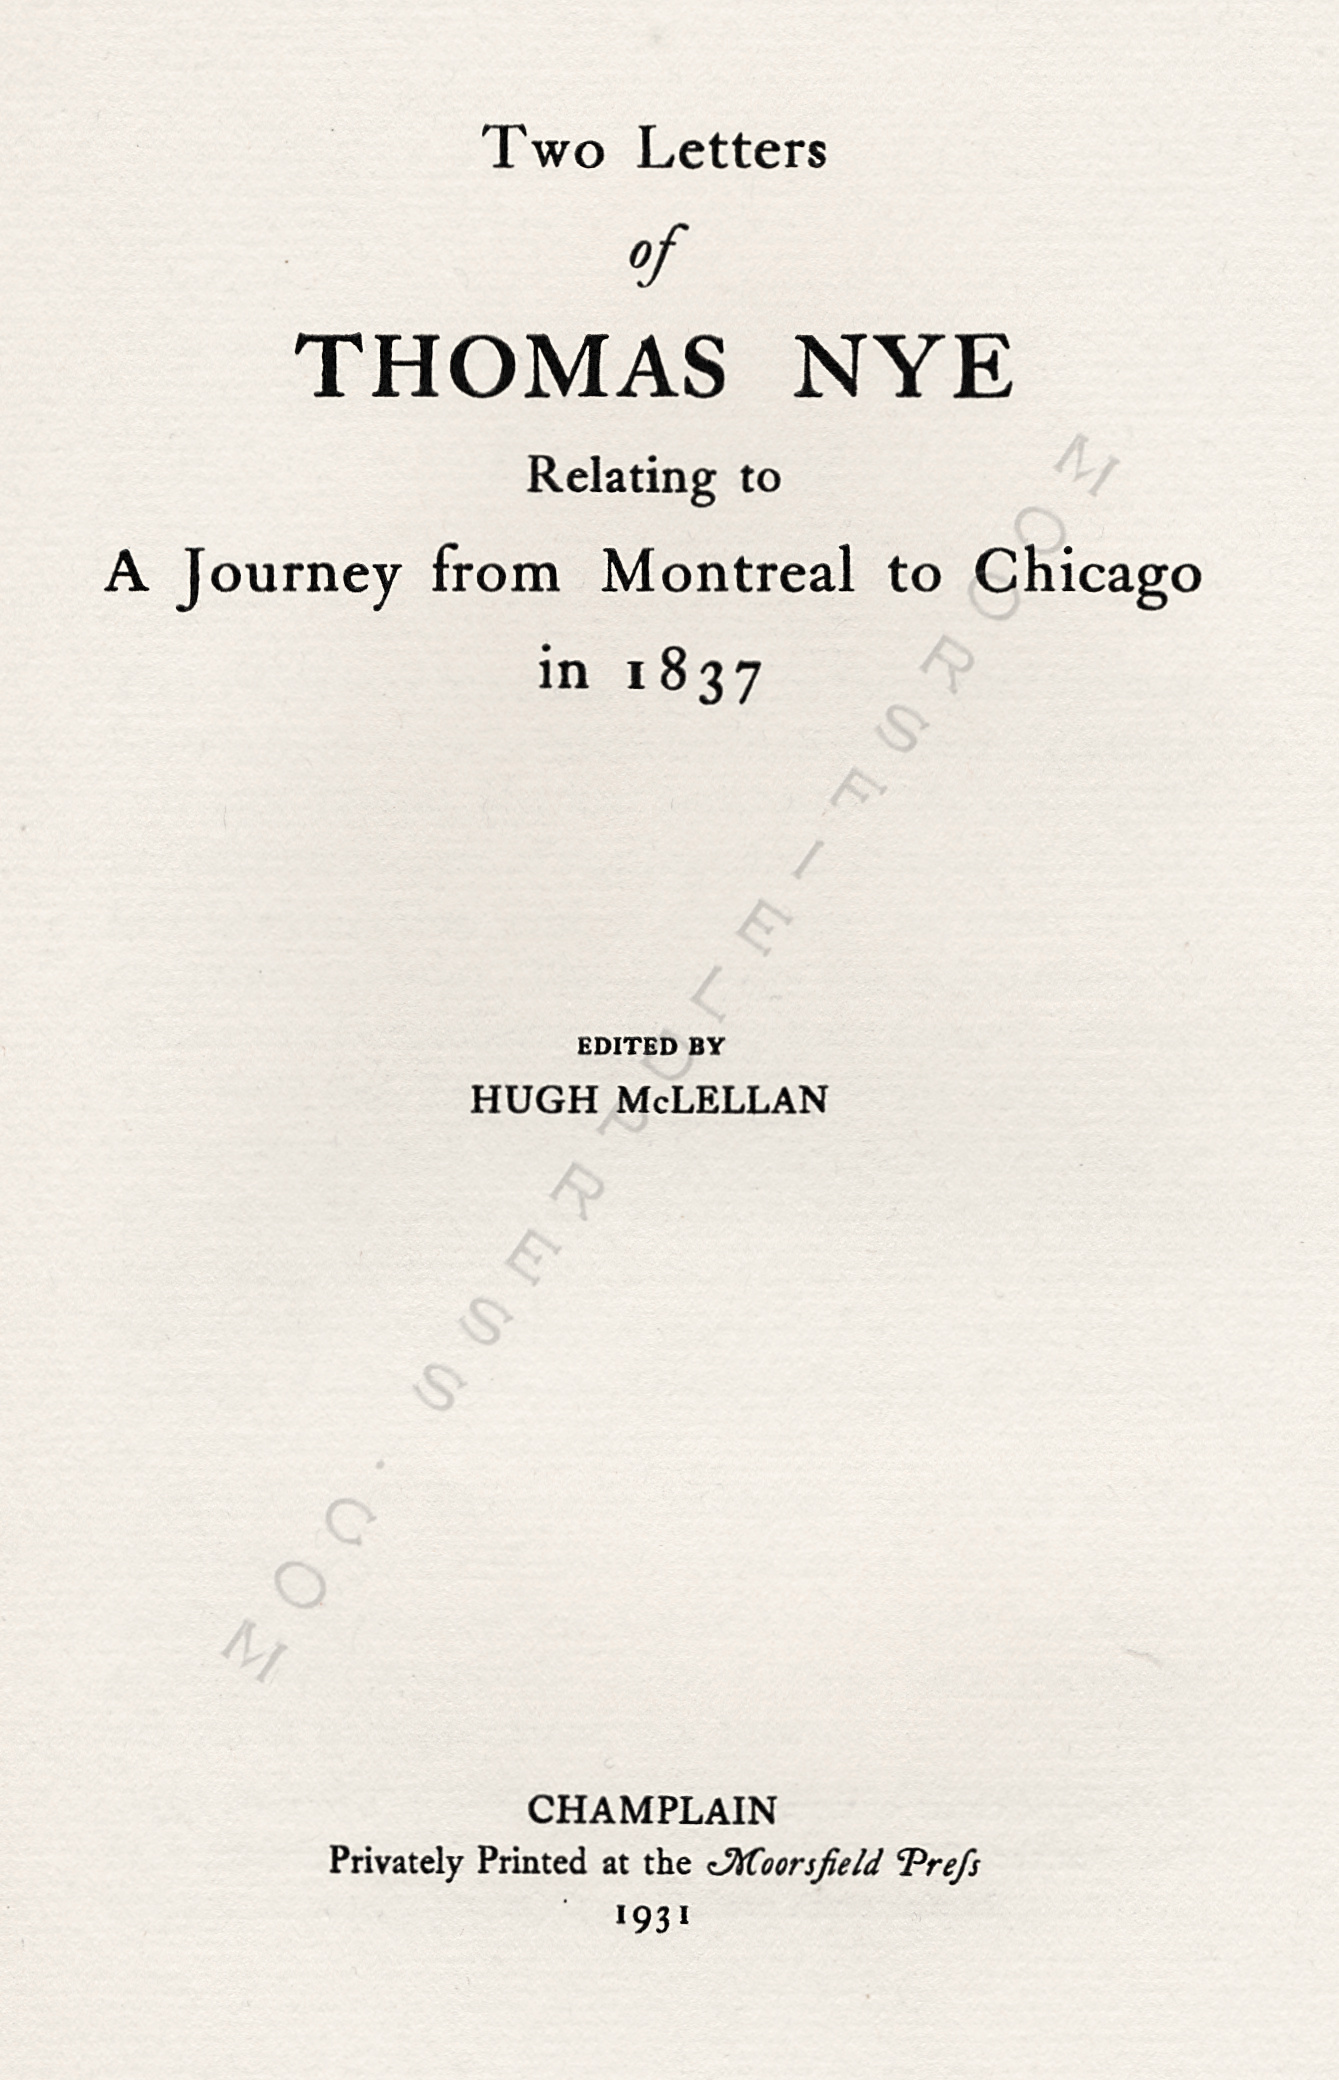 TWO
                      LETTERS OF THOMAS NYE RELATING TO A JOURNEY FROM
                      MONTREAL TO CHICAGO IN 1837